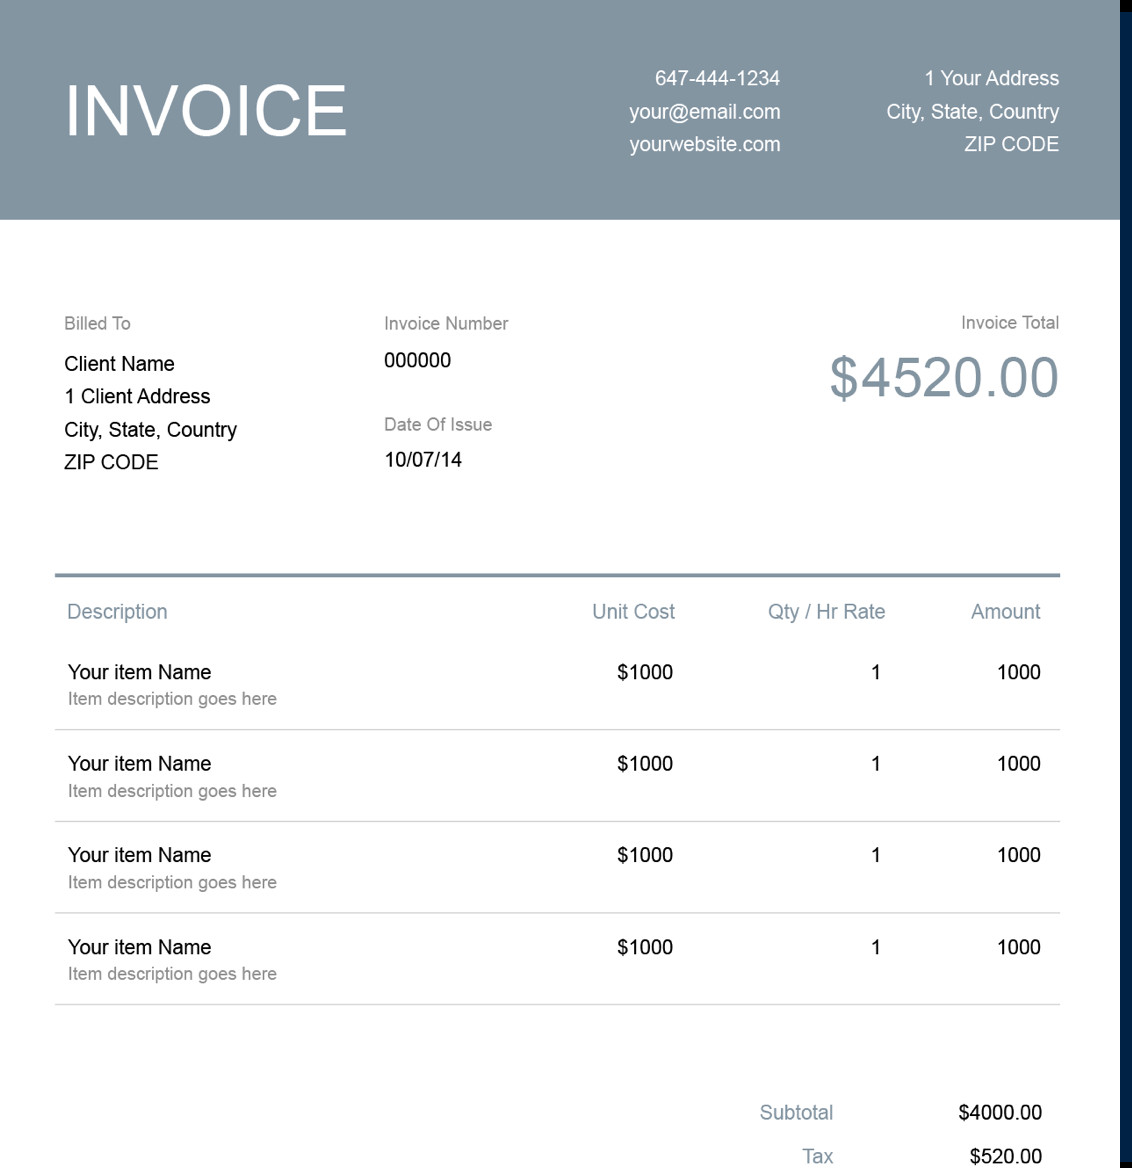 Self Employed Invoice Template Self Employed Invoice Template Free Download